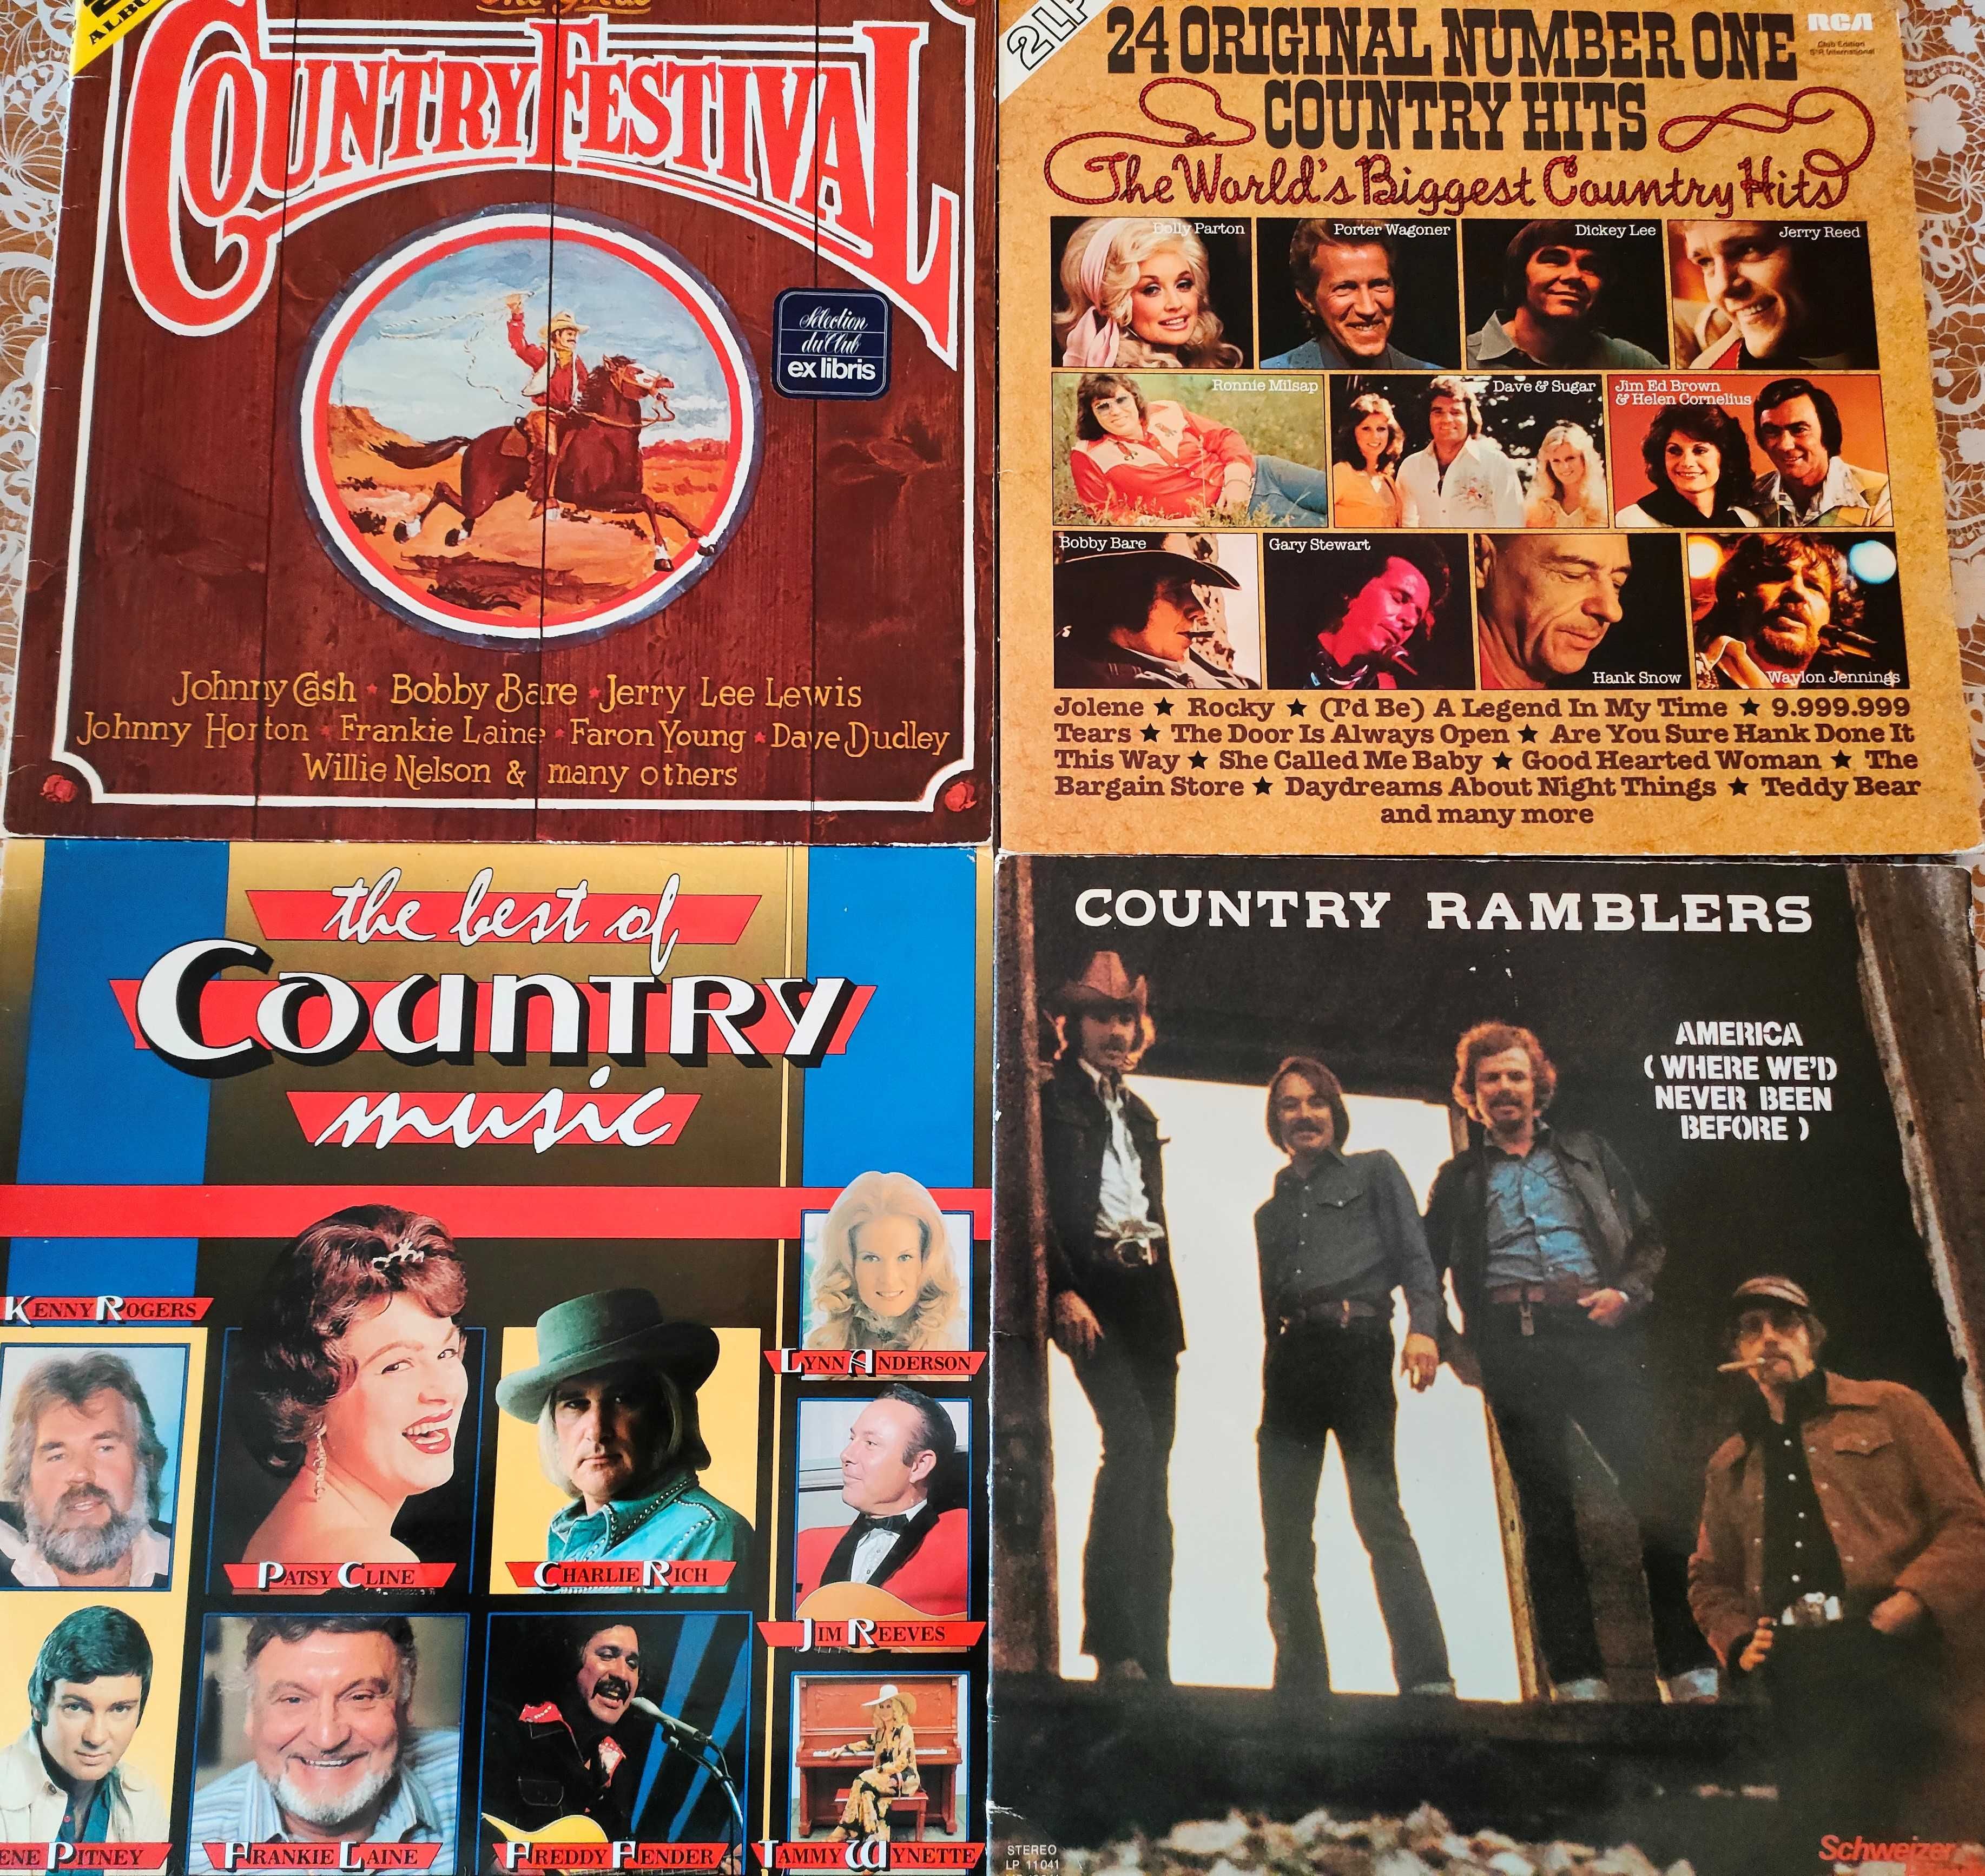 Vinil/vinyl - Country- Jim Reeves,Dave Dudley,George Hamilton,Selectii